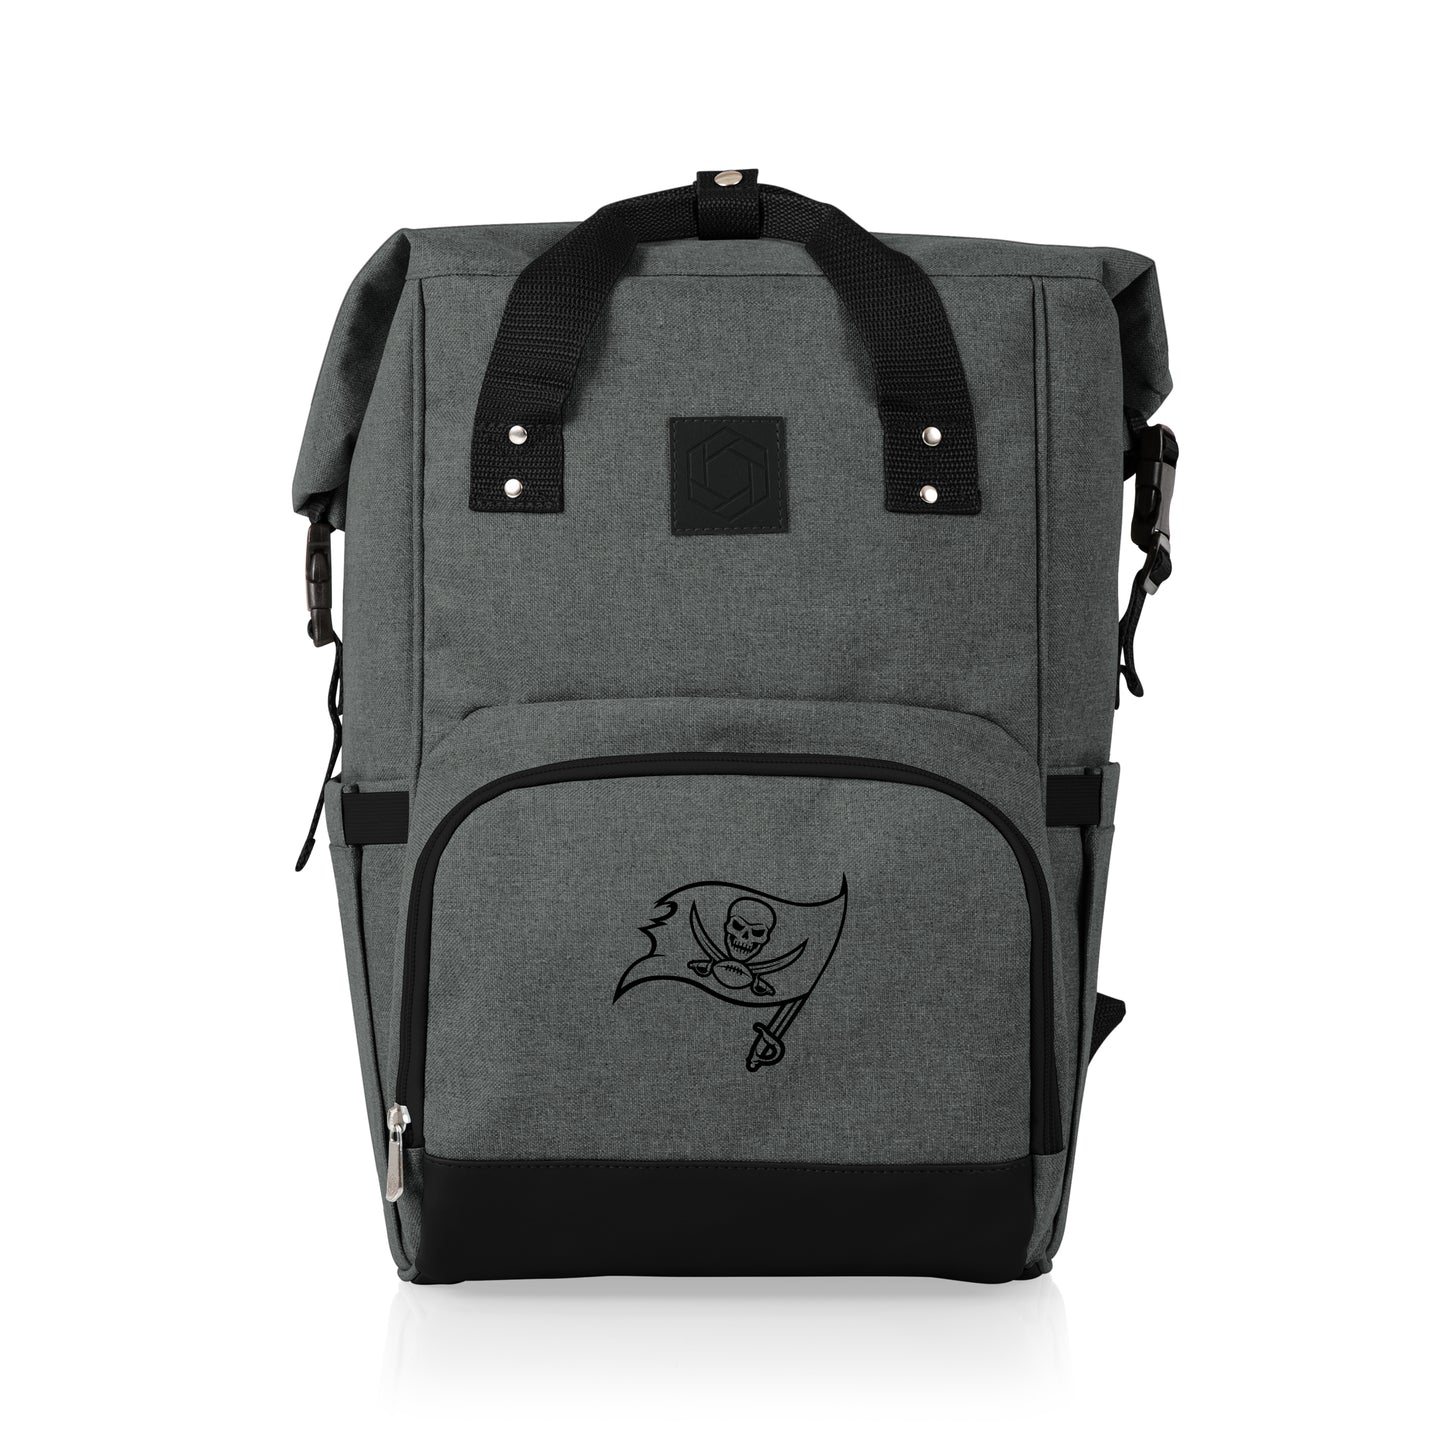 Tampa Bay Buccaneers - On The Go Roll-Top Cooler Backpack